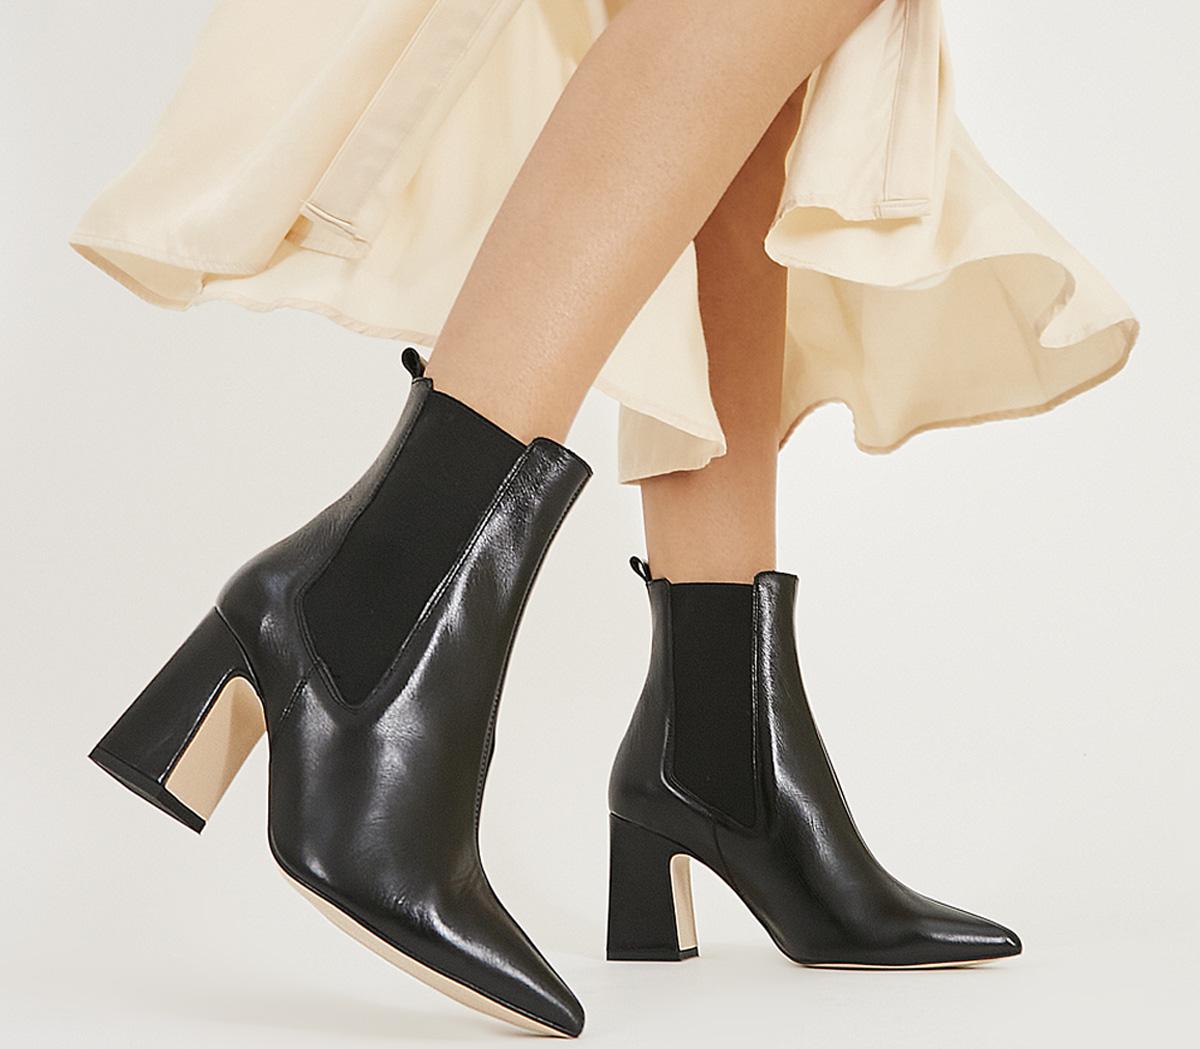 OFFICE Adore Chelsea Boots Black Leather - Women's Ankle Boots